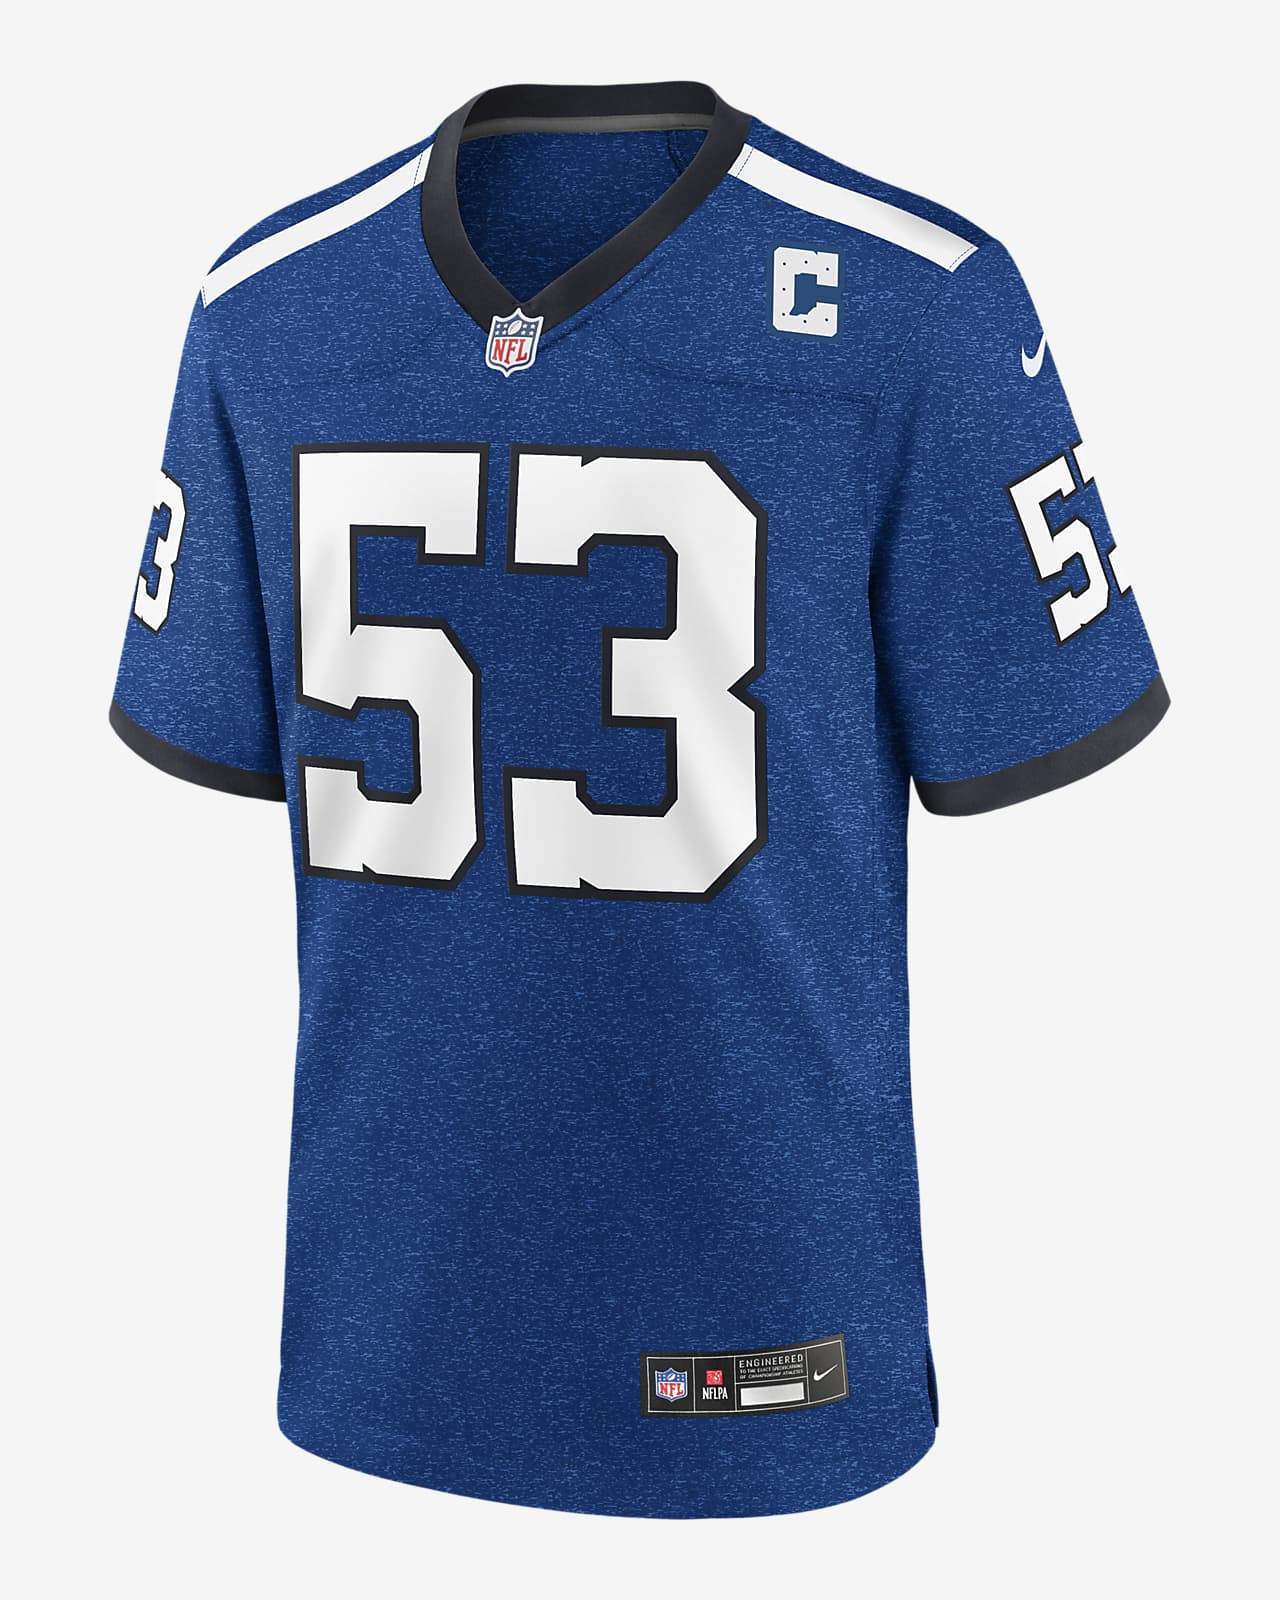 Shaquille Leonard Indianapolis Colts Men's Nike NFL Game Football Jersey